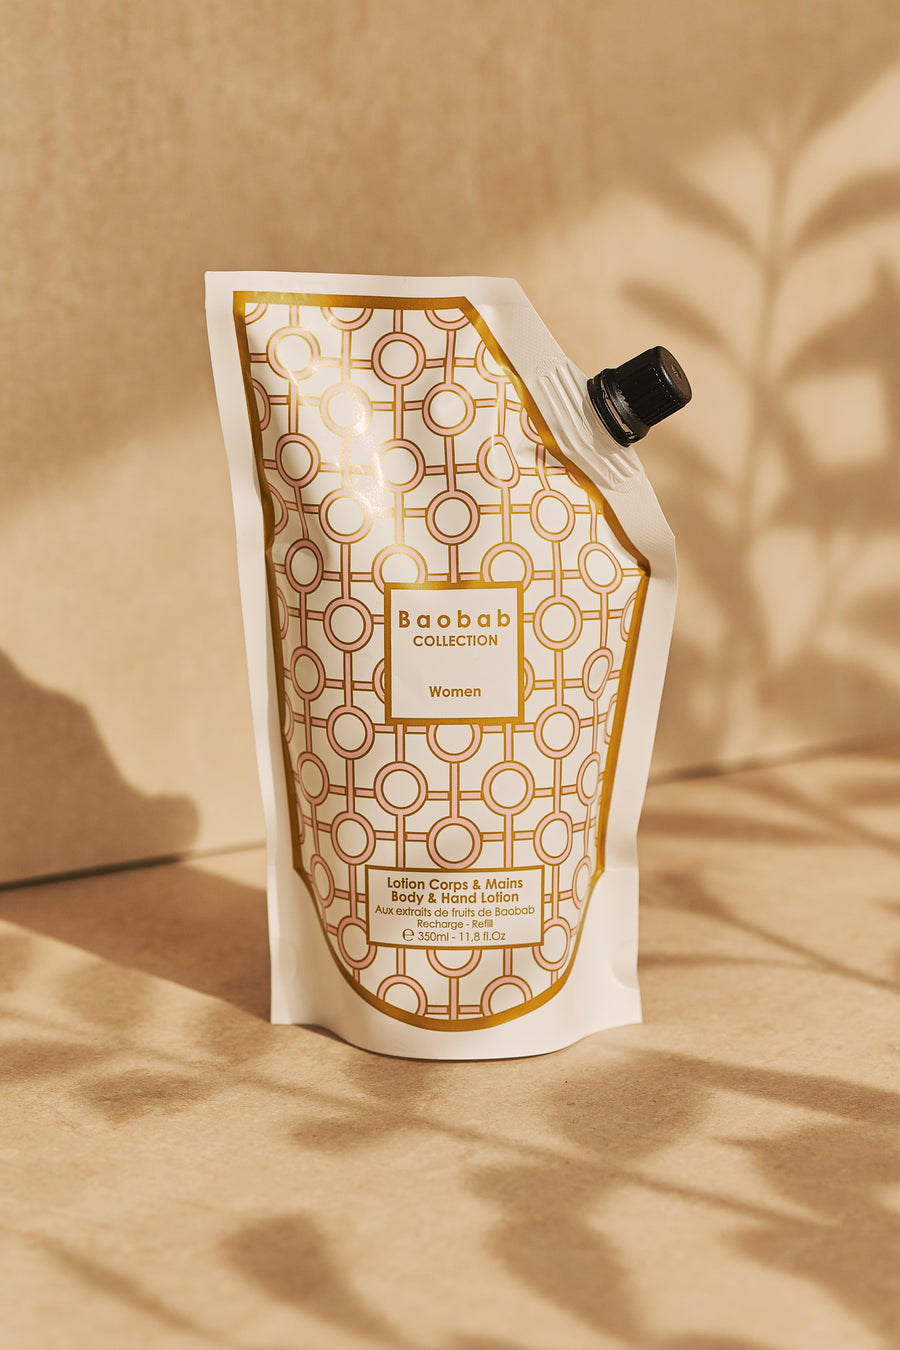 REFILL BODY & HAND LOTION WOMEN - Baobab Collection